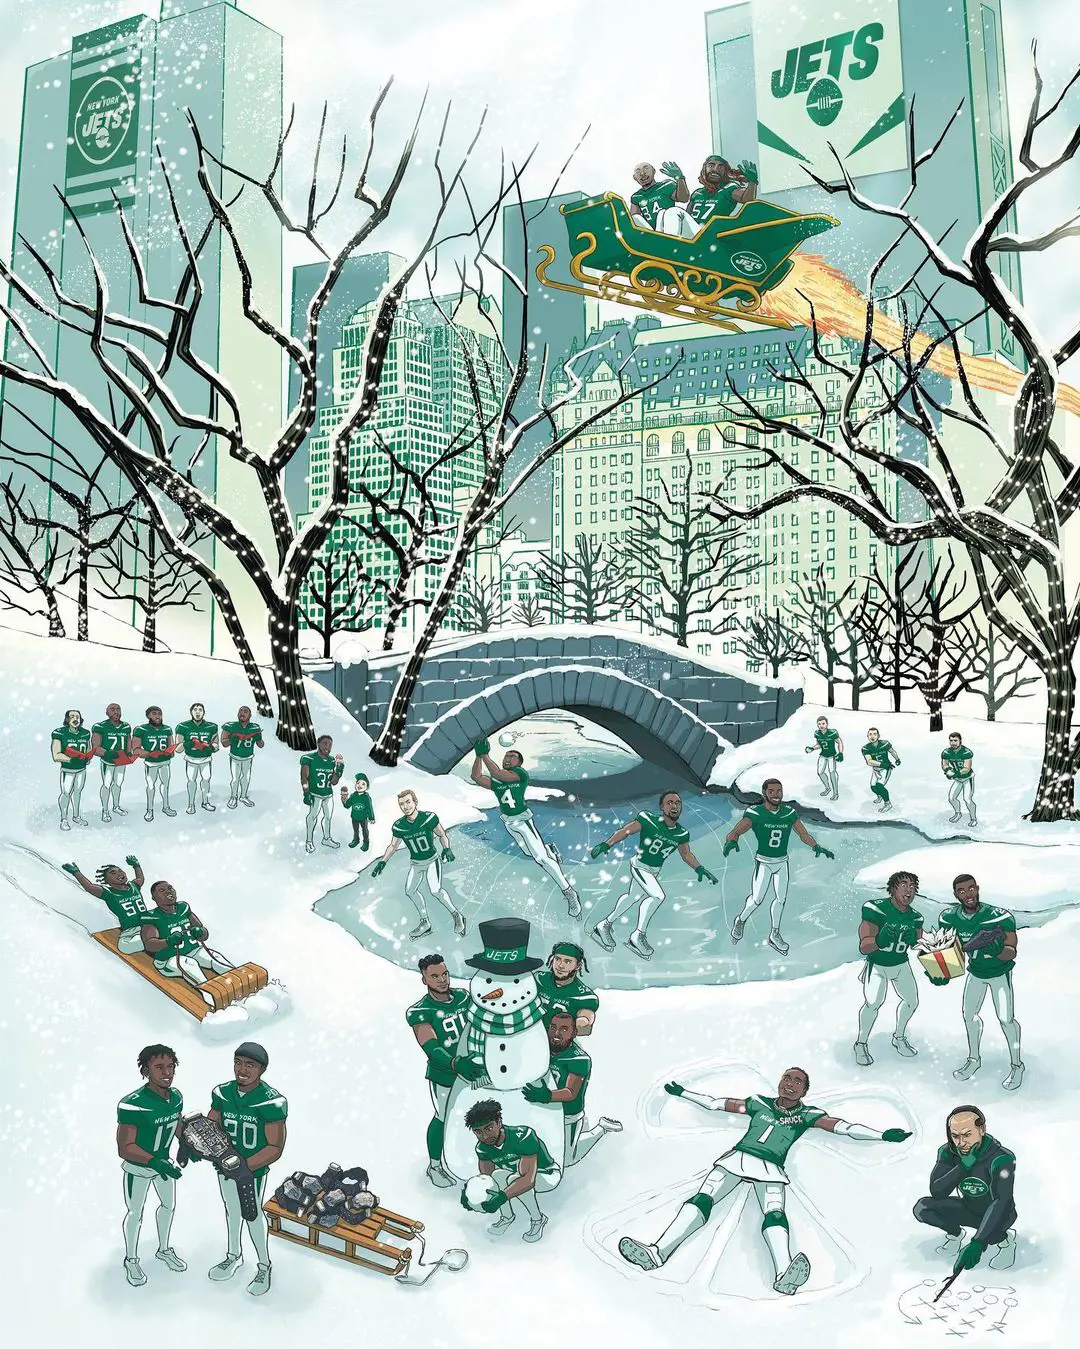 New York Jets team wish their fans on Christmas 